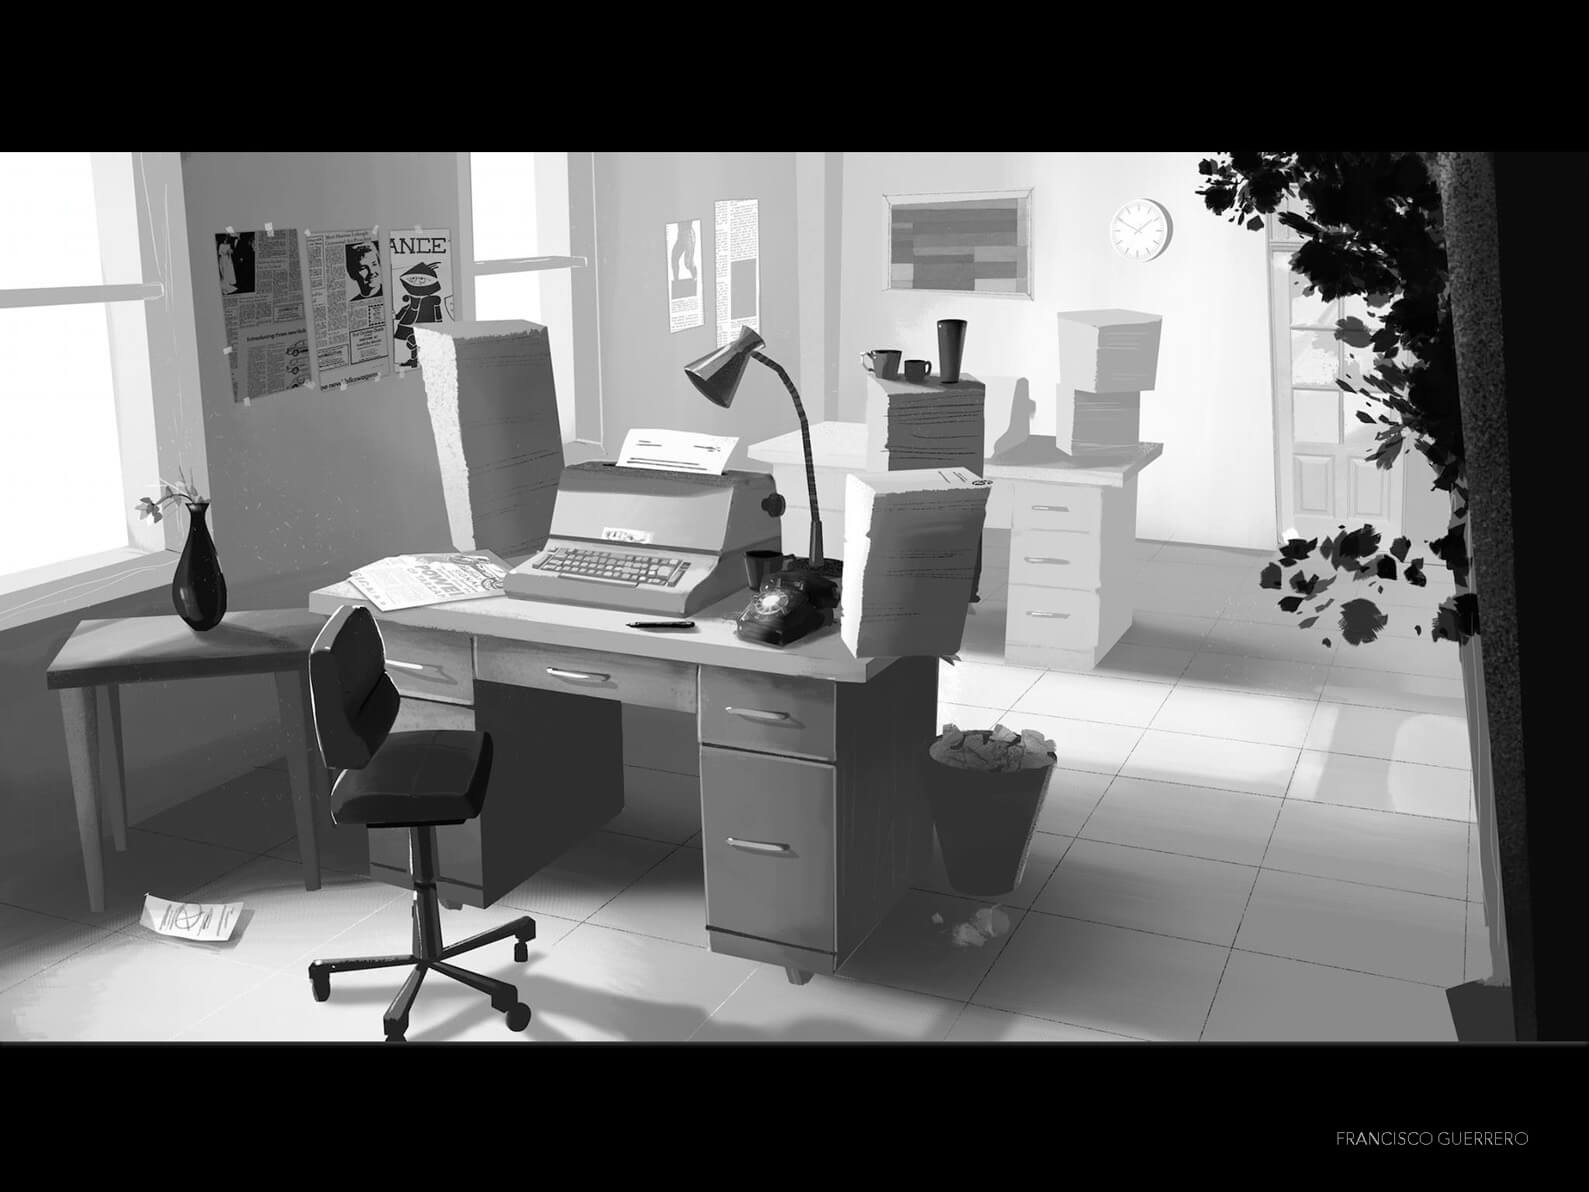 Grayscale drawing of an office setting with desks, chairs, typewriters, and paper stacks in Orientation Center for the Unseen